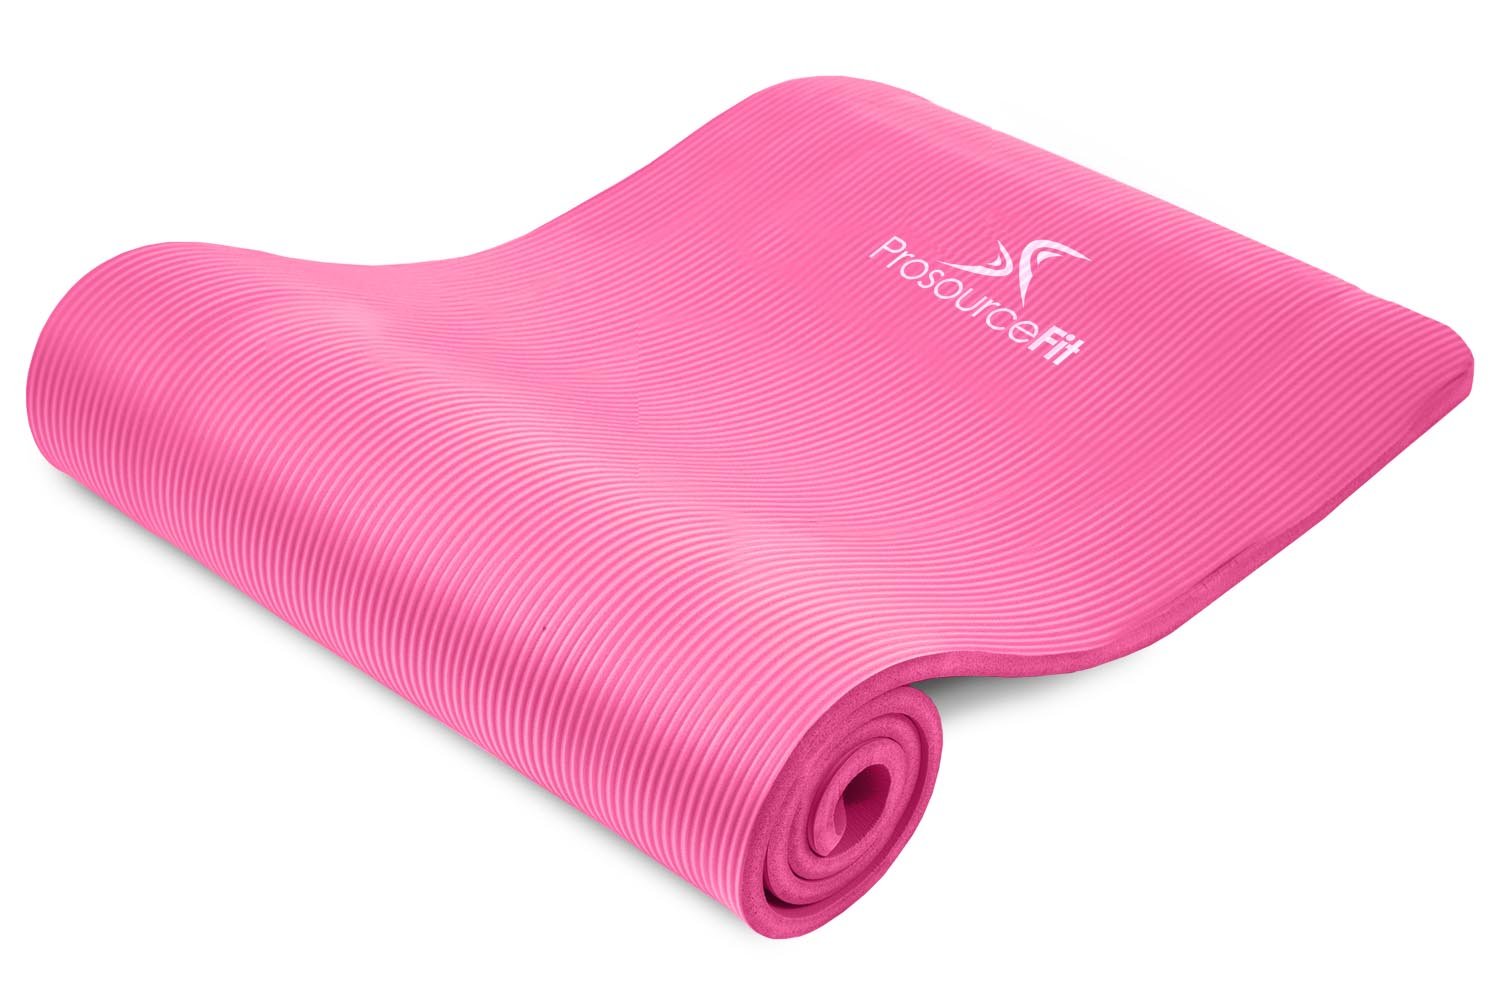 Basics 13mm Extra Thick Yoga and Exercise Mat with